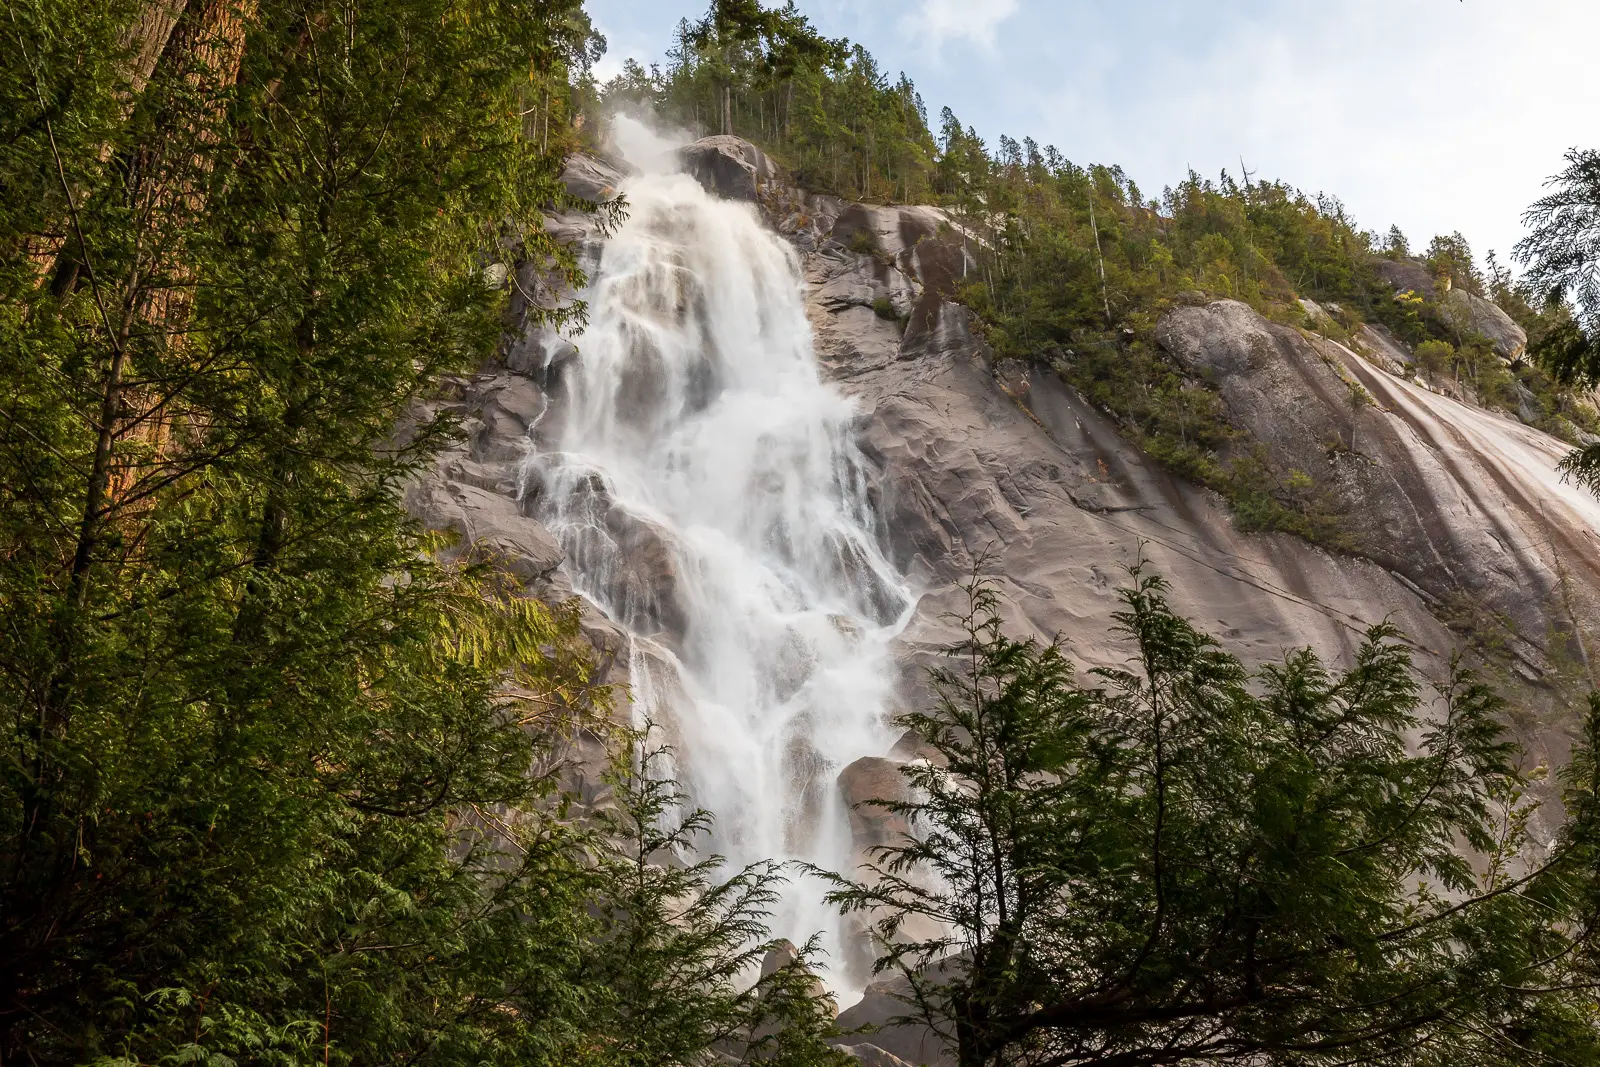 The waterfall in Shannon Falls Provincial Park in Squamish, BC